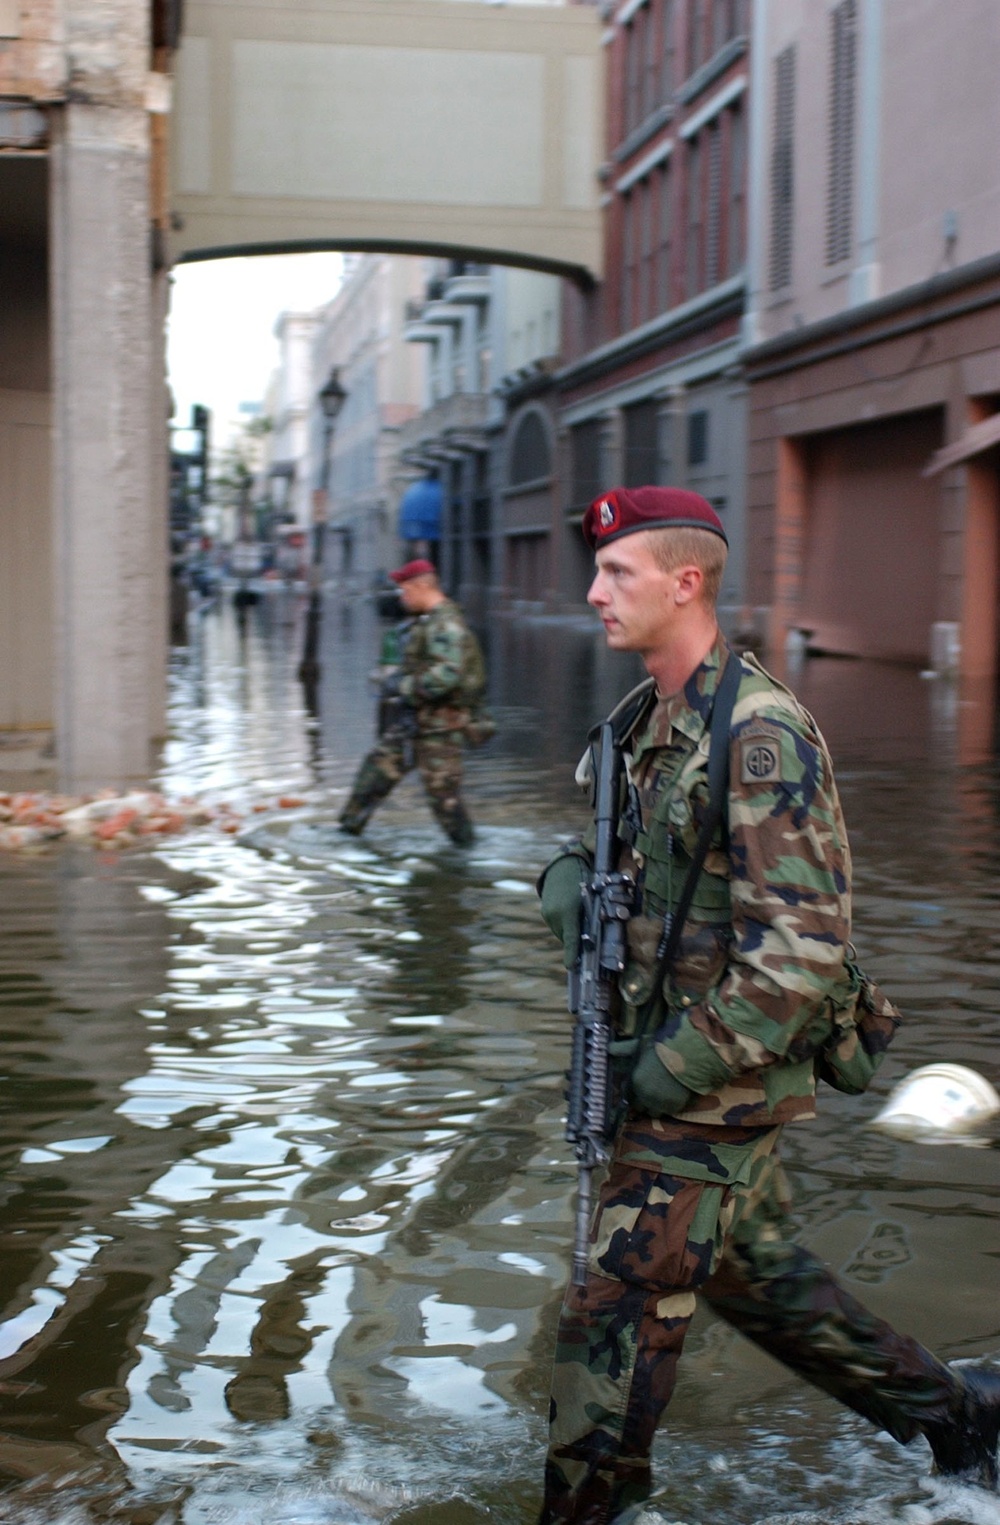 Paratroopers tramp through ankle-high water during a presence patrol